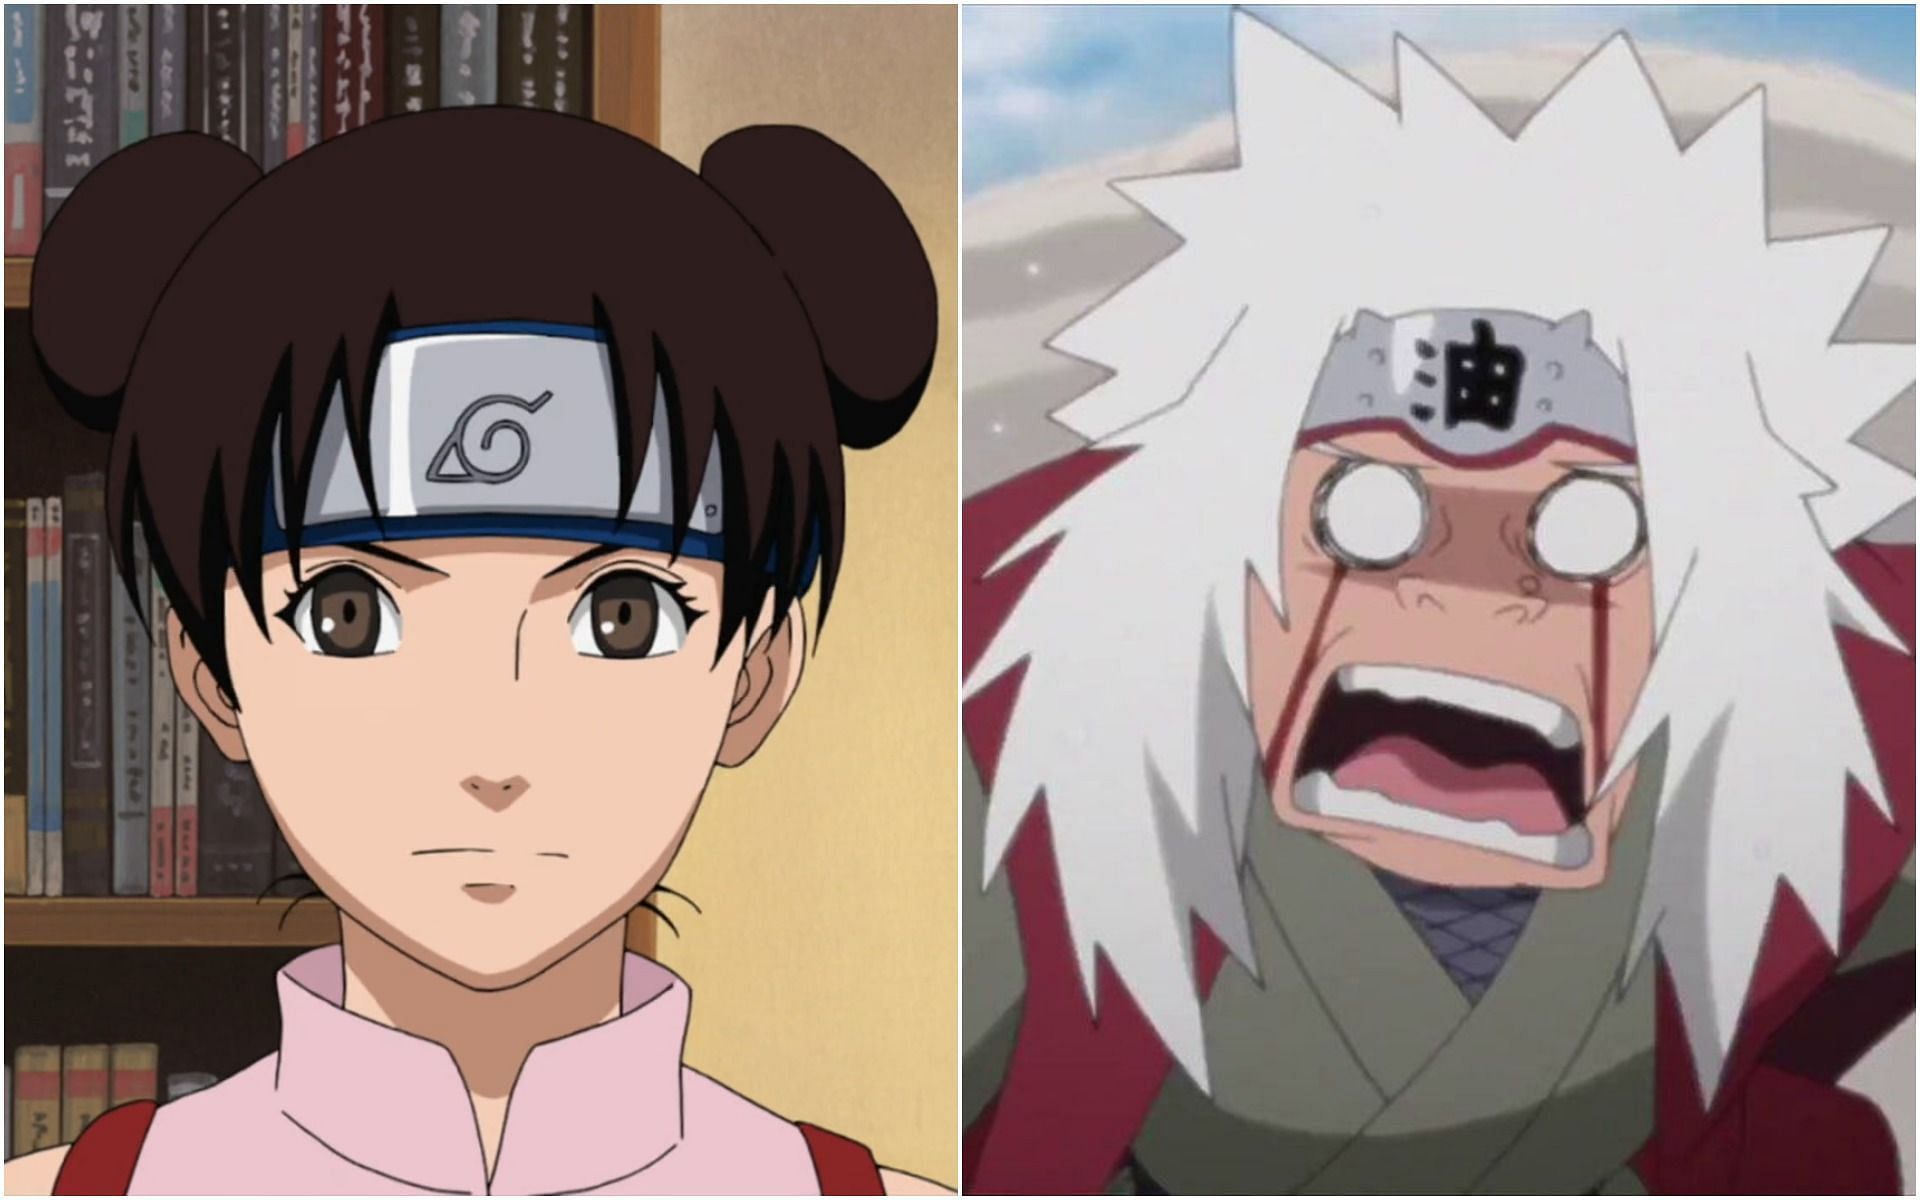 Why does Naruto seem so powerful, but also so underwhelming at the